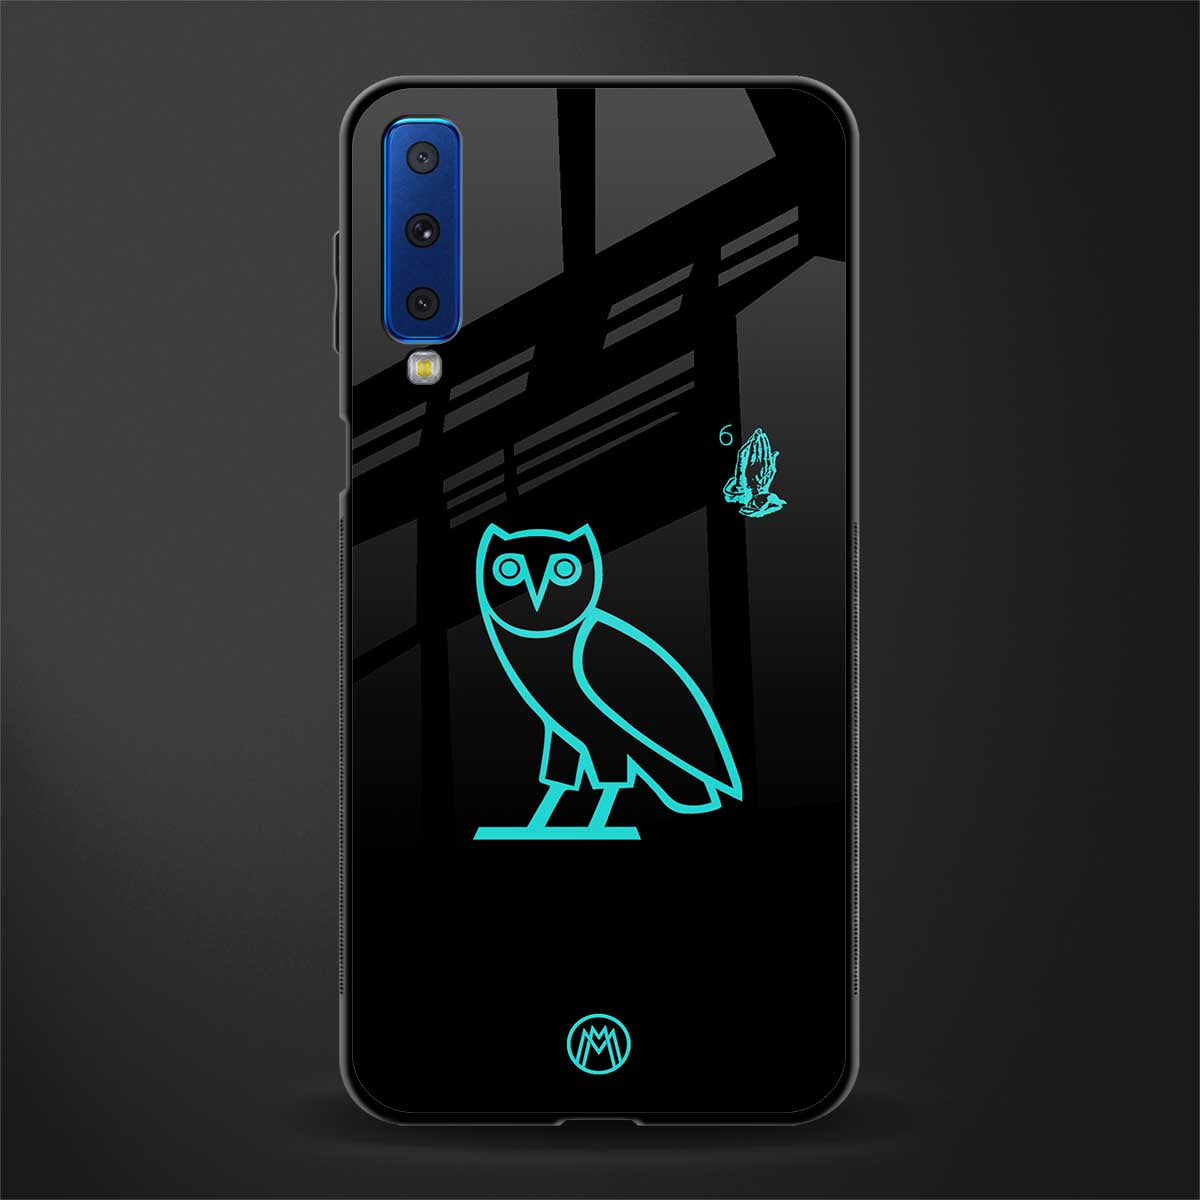 ovo glass case for samsung galaxy a7 2018 image